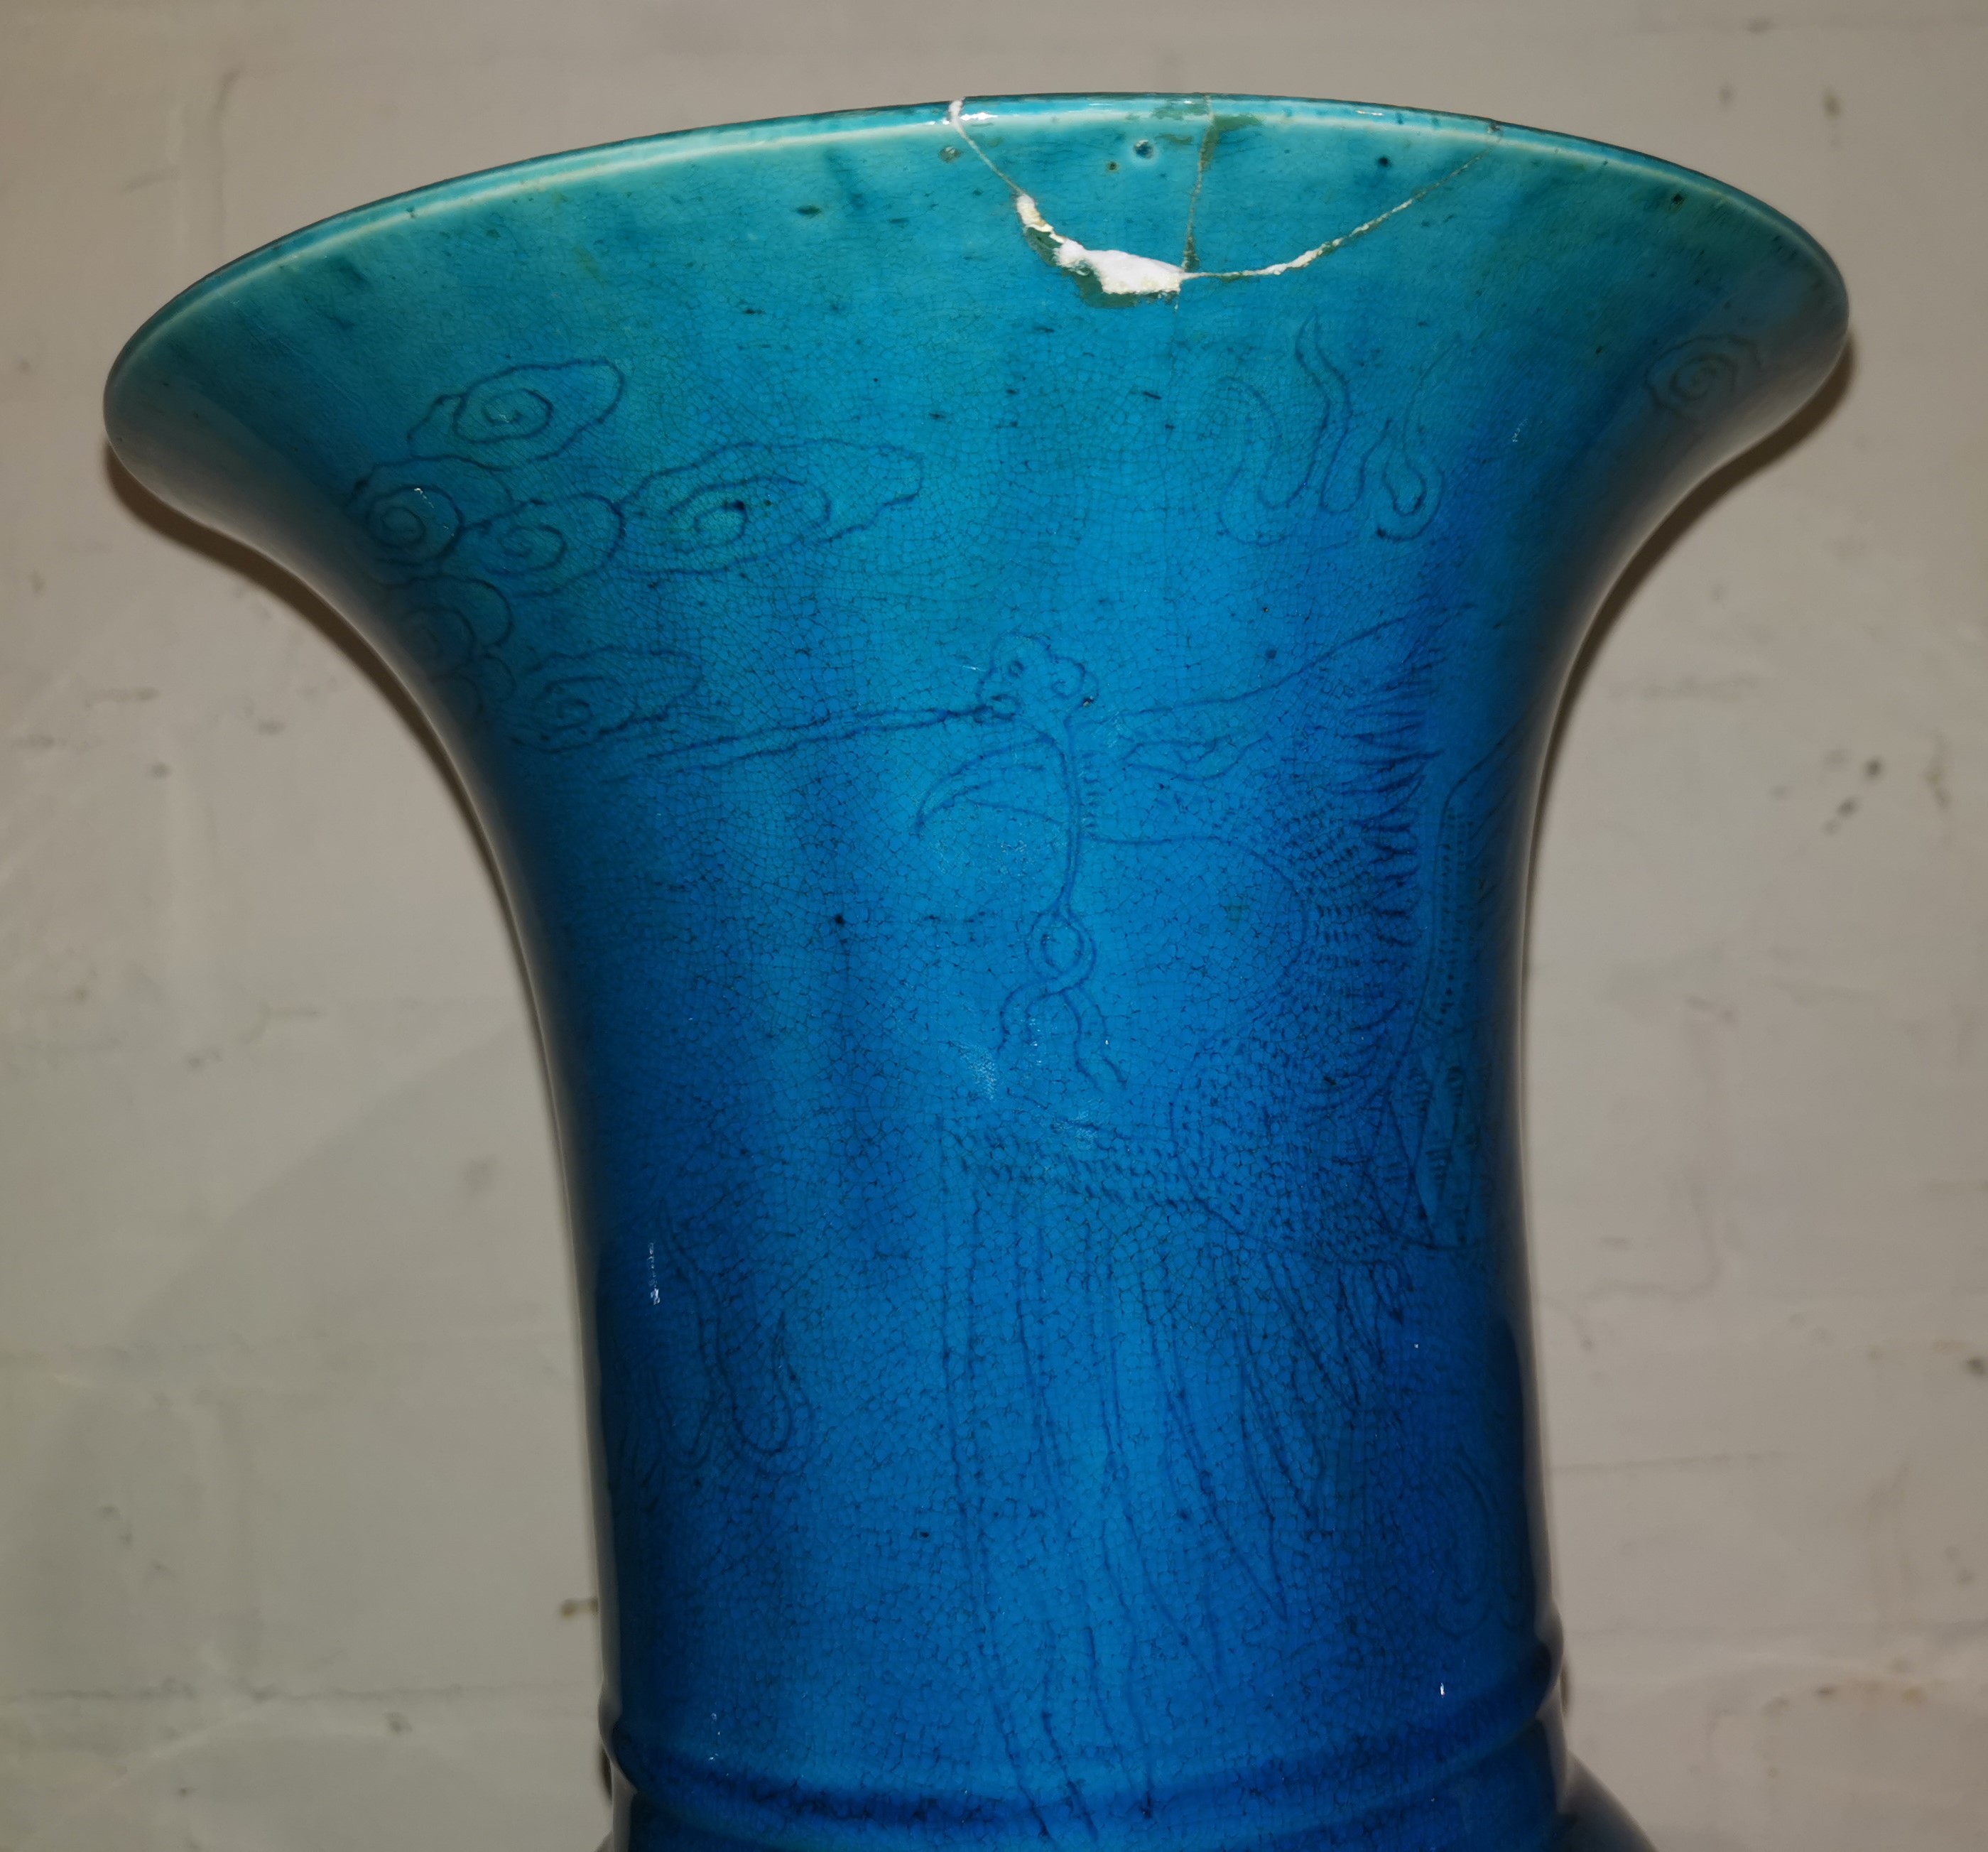 A Chinese Kangxi beaker vase decorated in low relief with dragons and fish under bright turquoise - Image 4 of 6